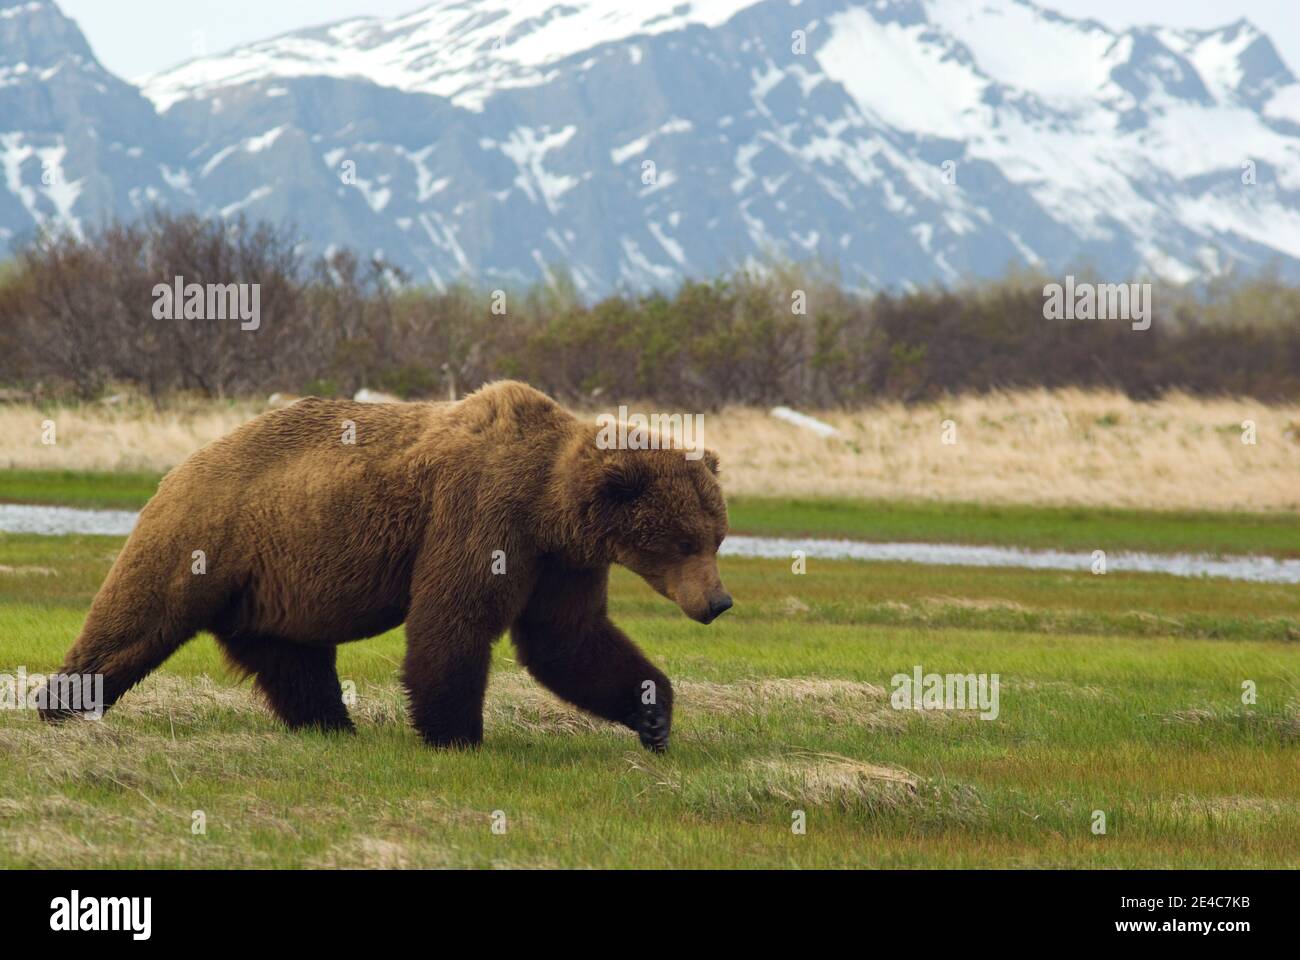 Large Alaskan Brown bear strolls threw meadow with stream and mountains in the background, taken in Katmai National Park Alaska, USA. Stock Photo